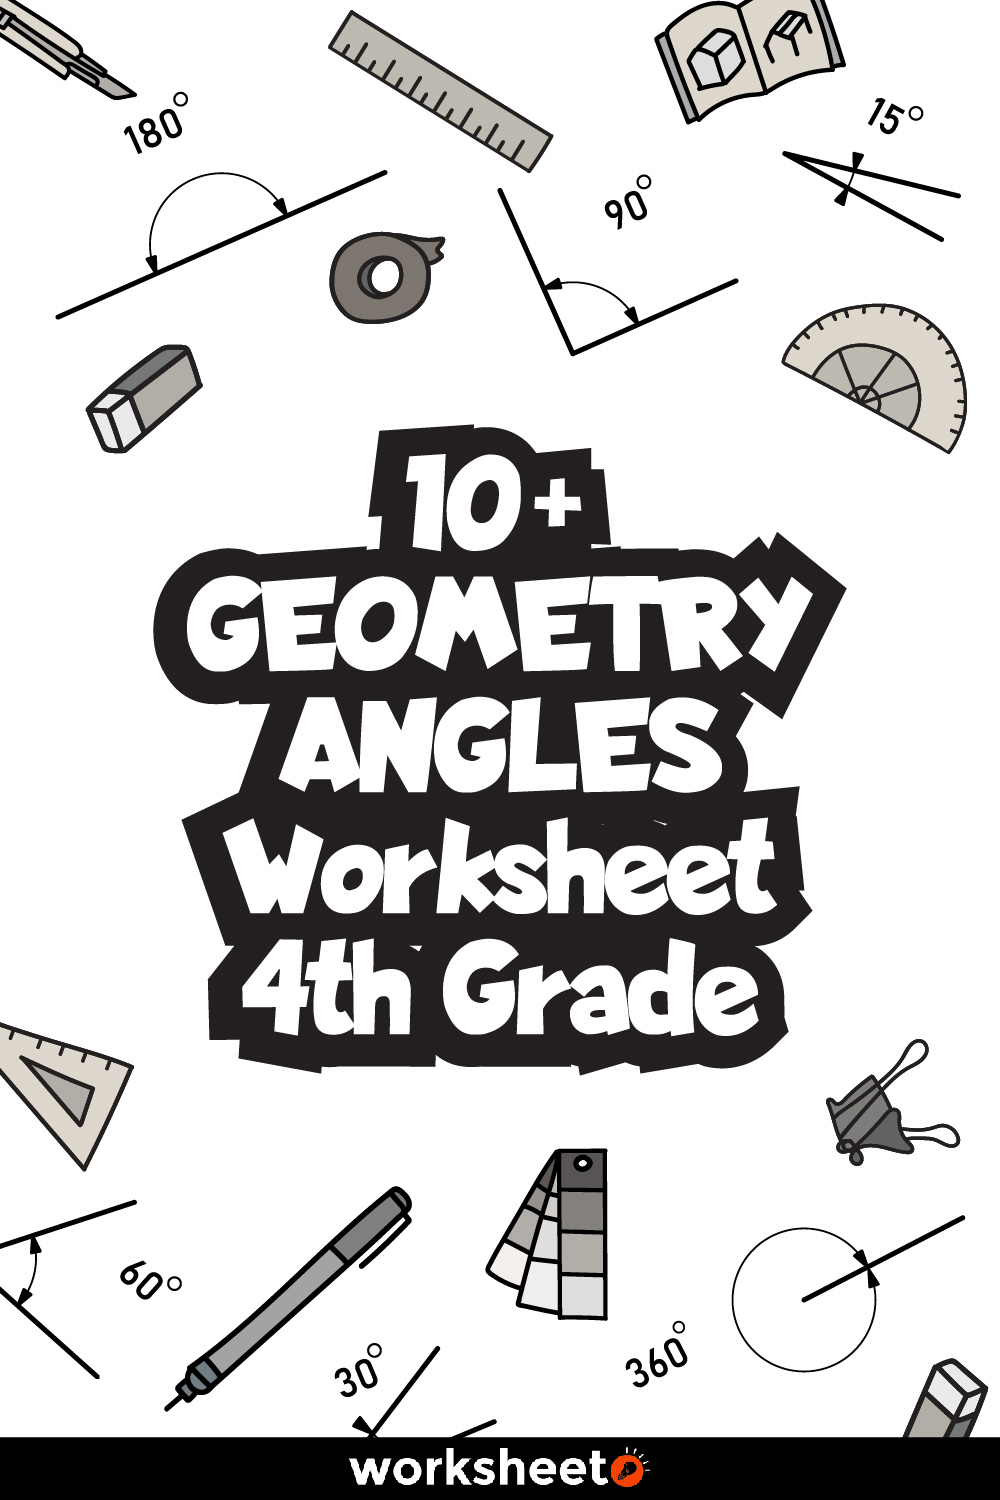 17 Images of Geometry Angles Worksheet 4th Grade